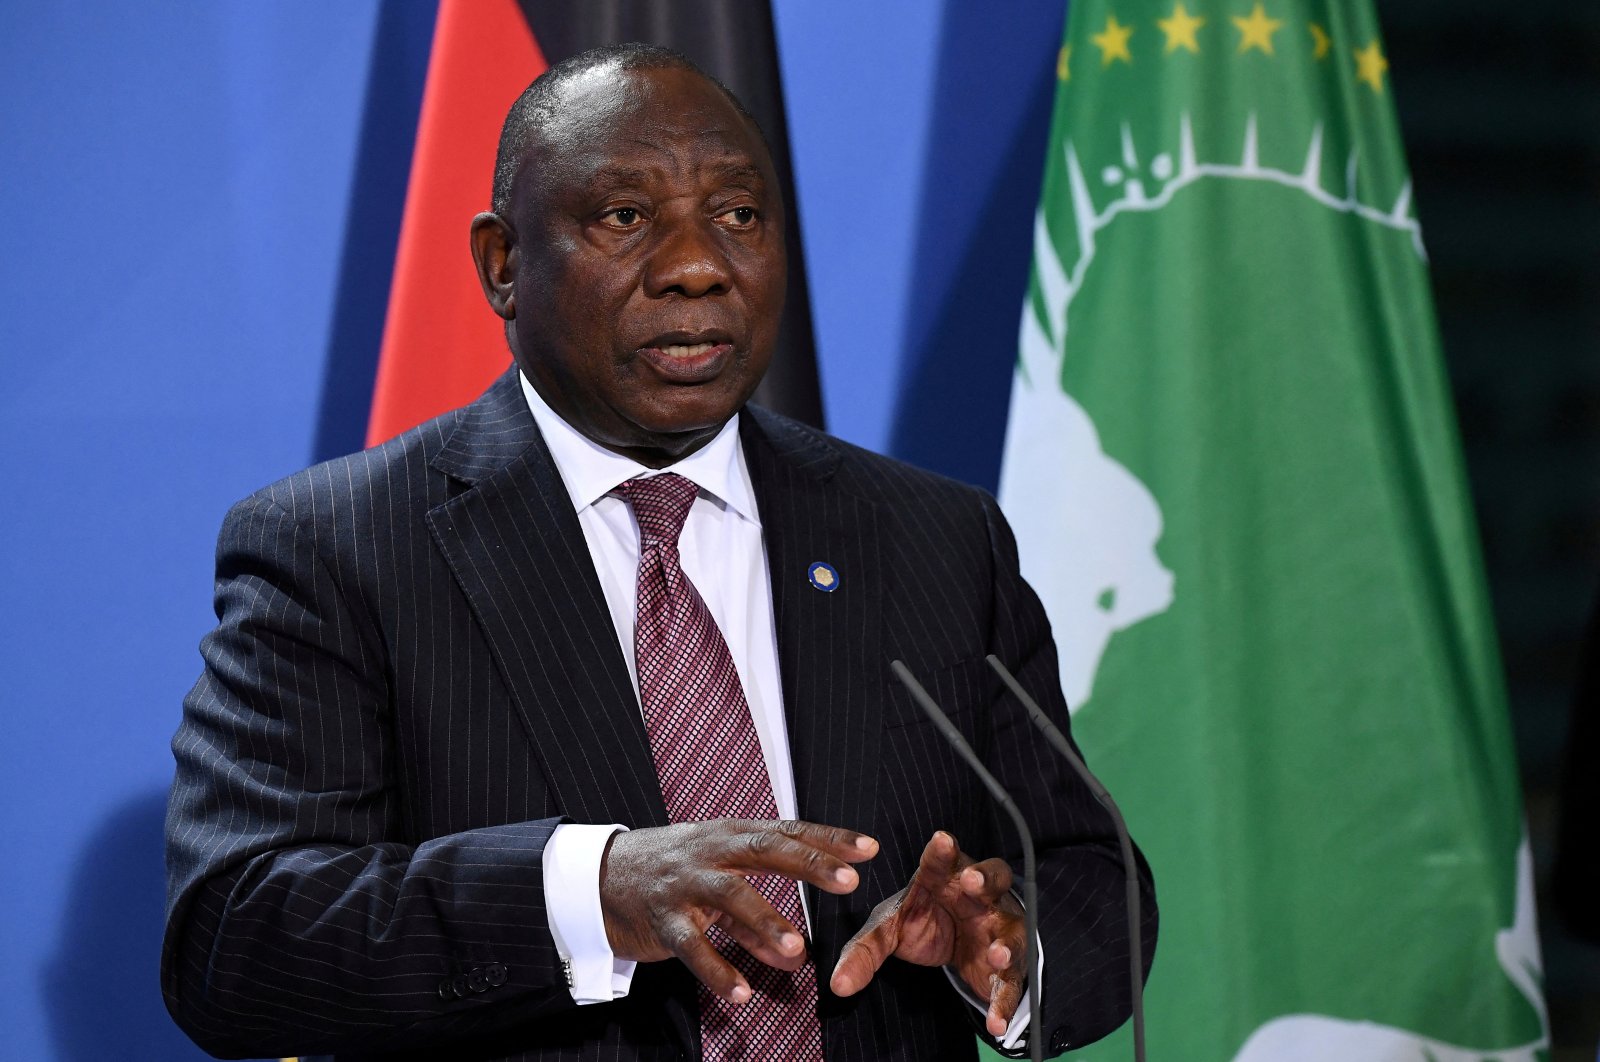 South African President Cyril Ramaphosa addresses a press conference after the G-20 Compact with Africa conference at the Chancellery in Berlin, Germany, Aug. 27, 2021. (Reuters Photo)